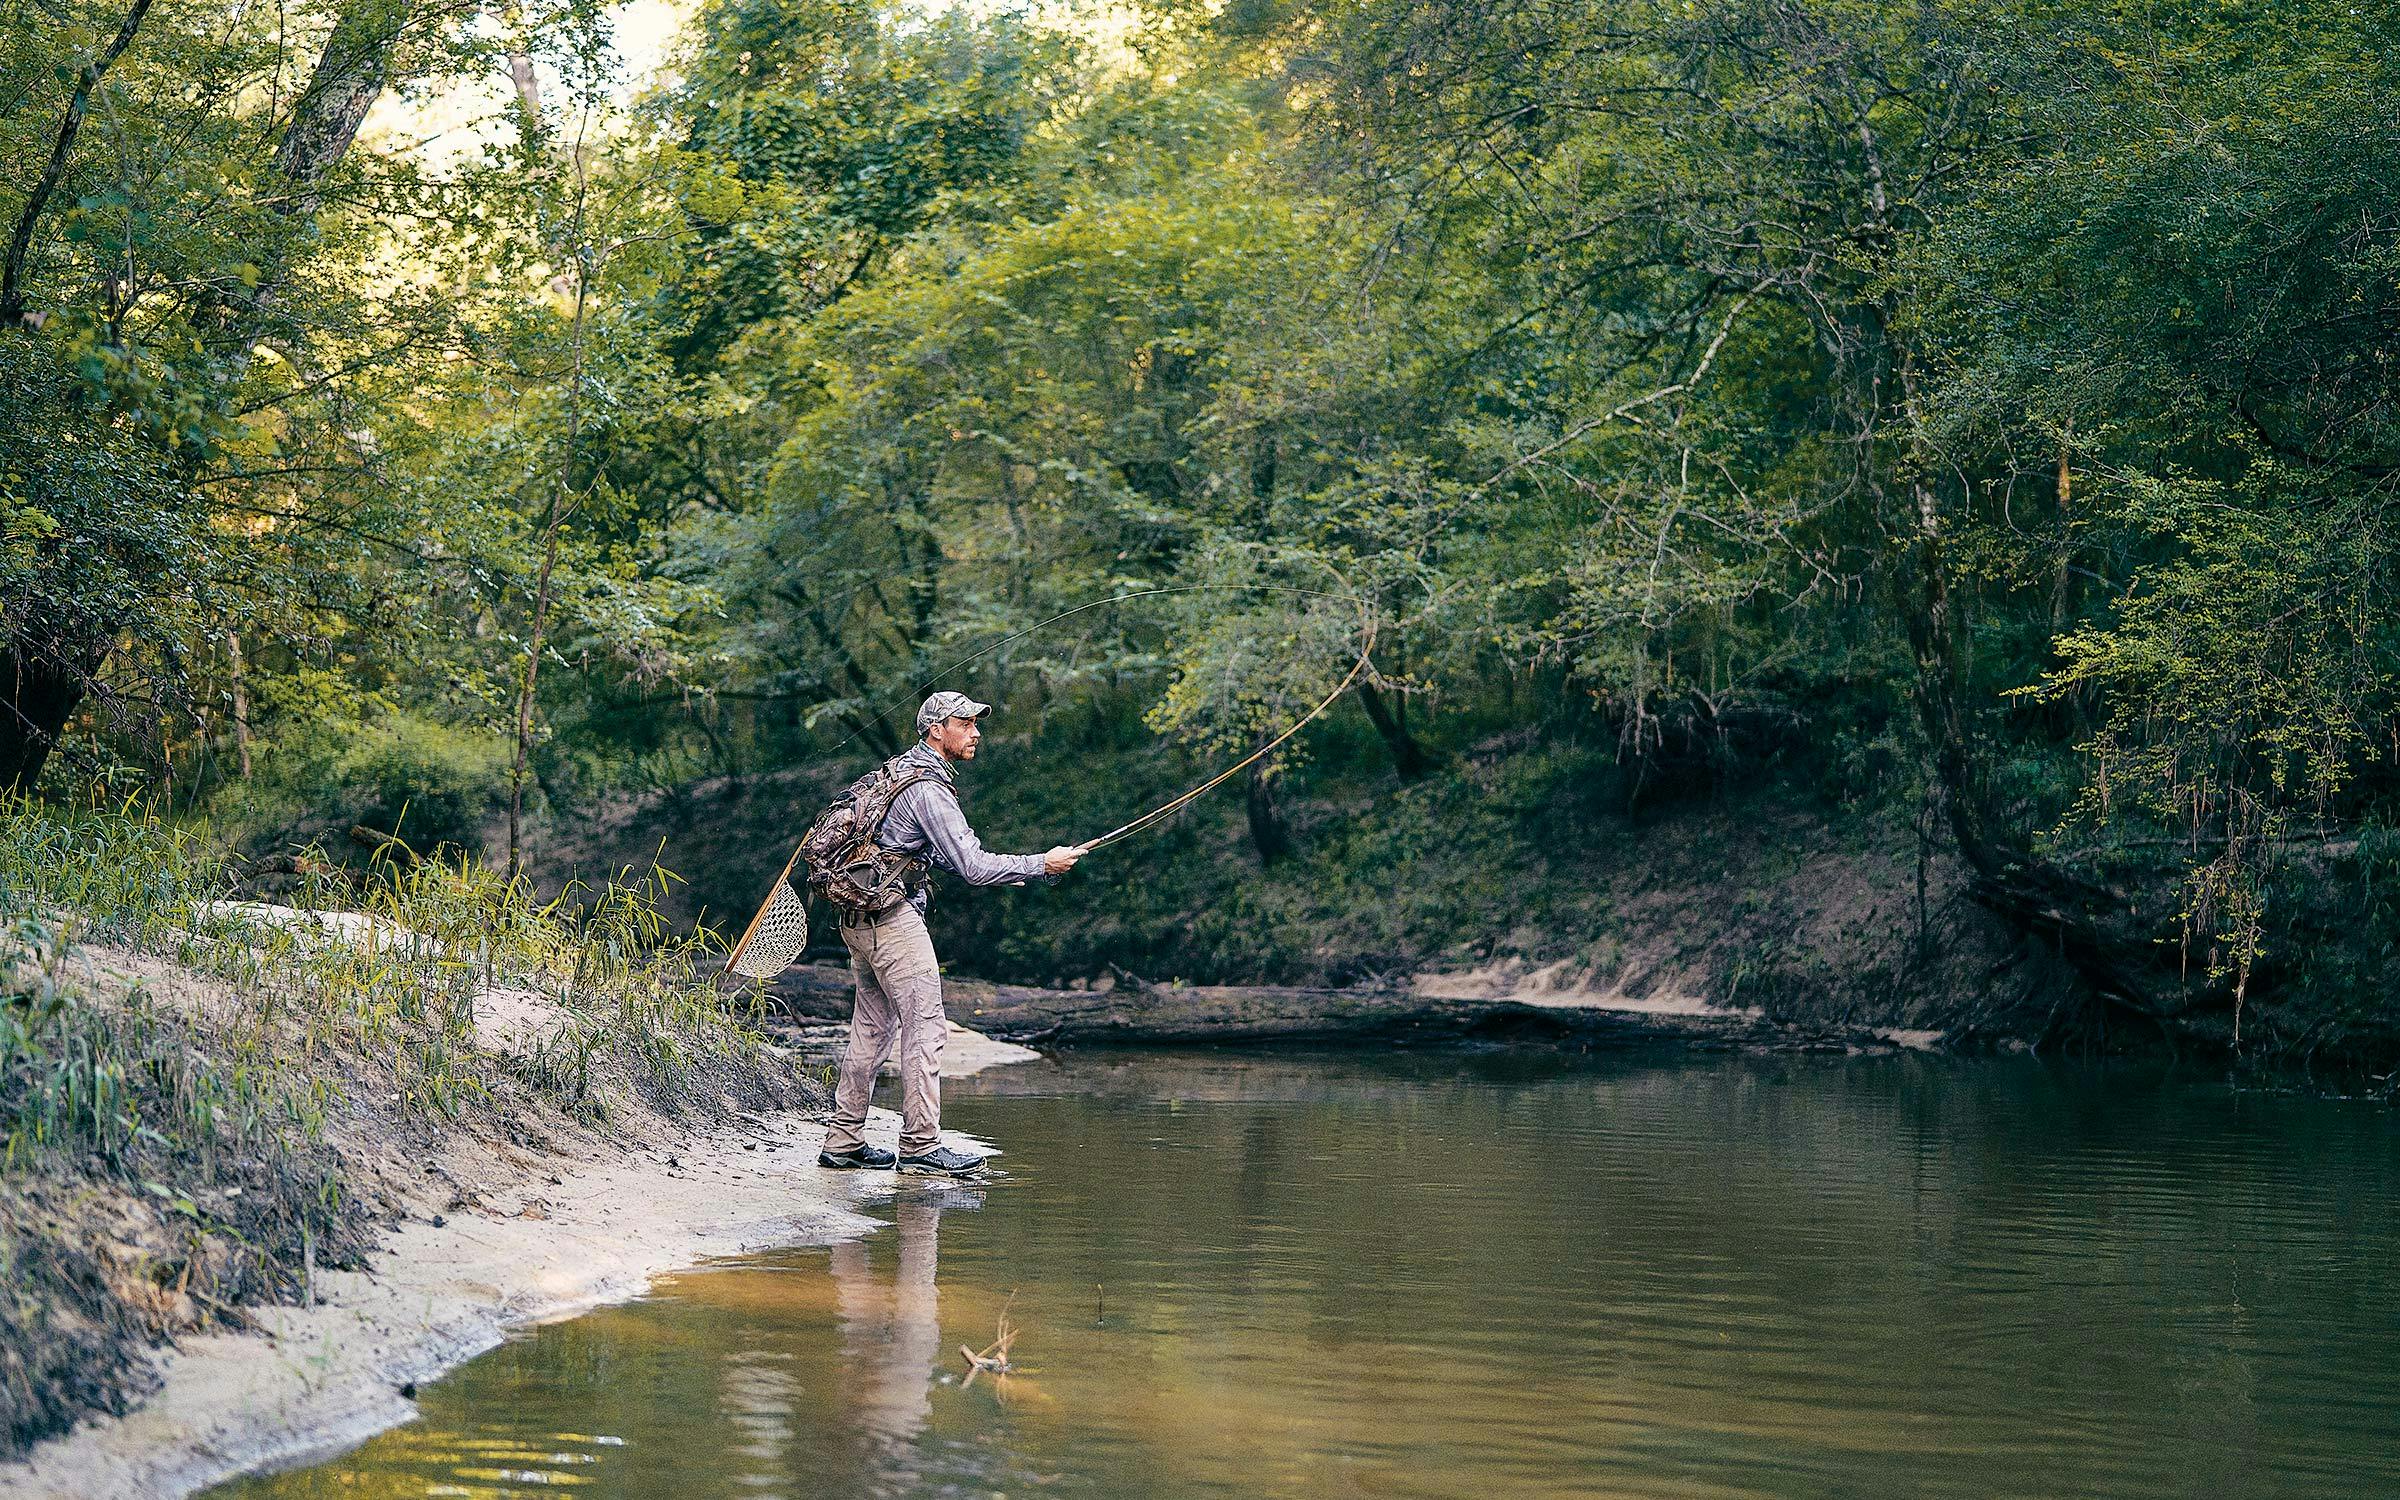 https://img.texasmonthly.com/2021/07/fly-fishing-east-texas-1.jpg?auto=compress&crop=faces&fit=fit&fm=pjpg&ixlib=php-3.3.1&q=45